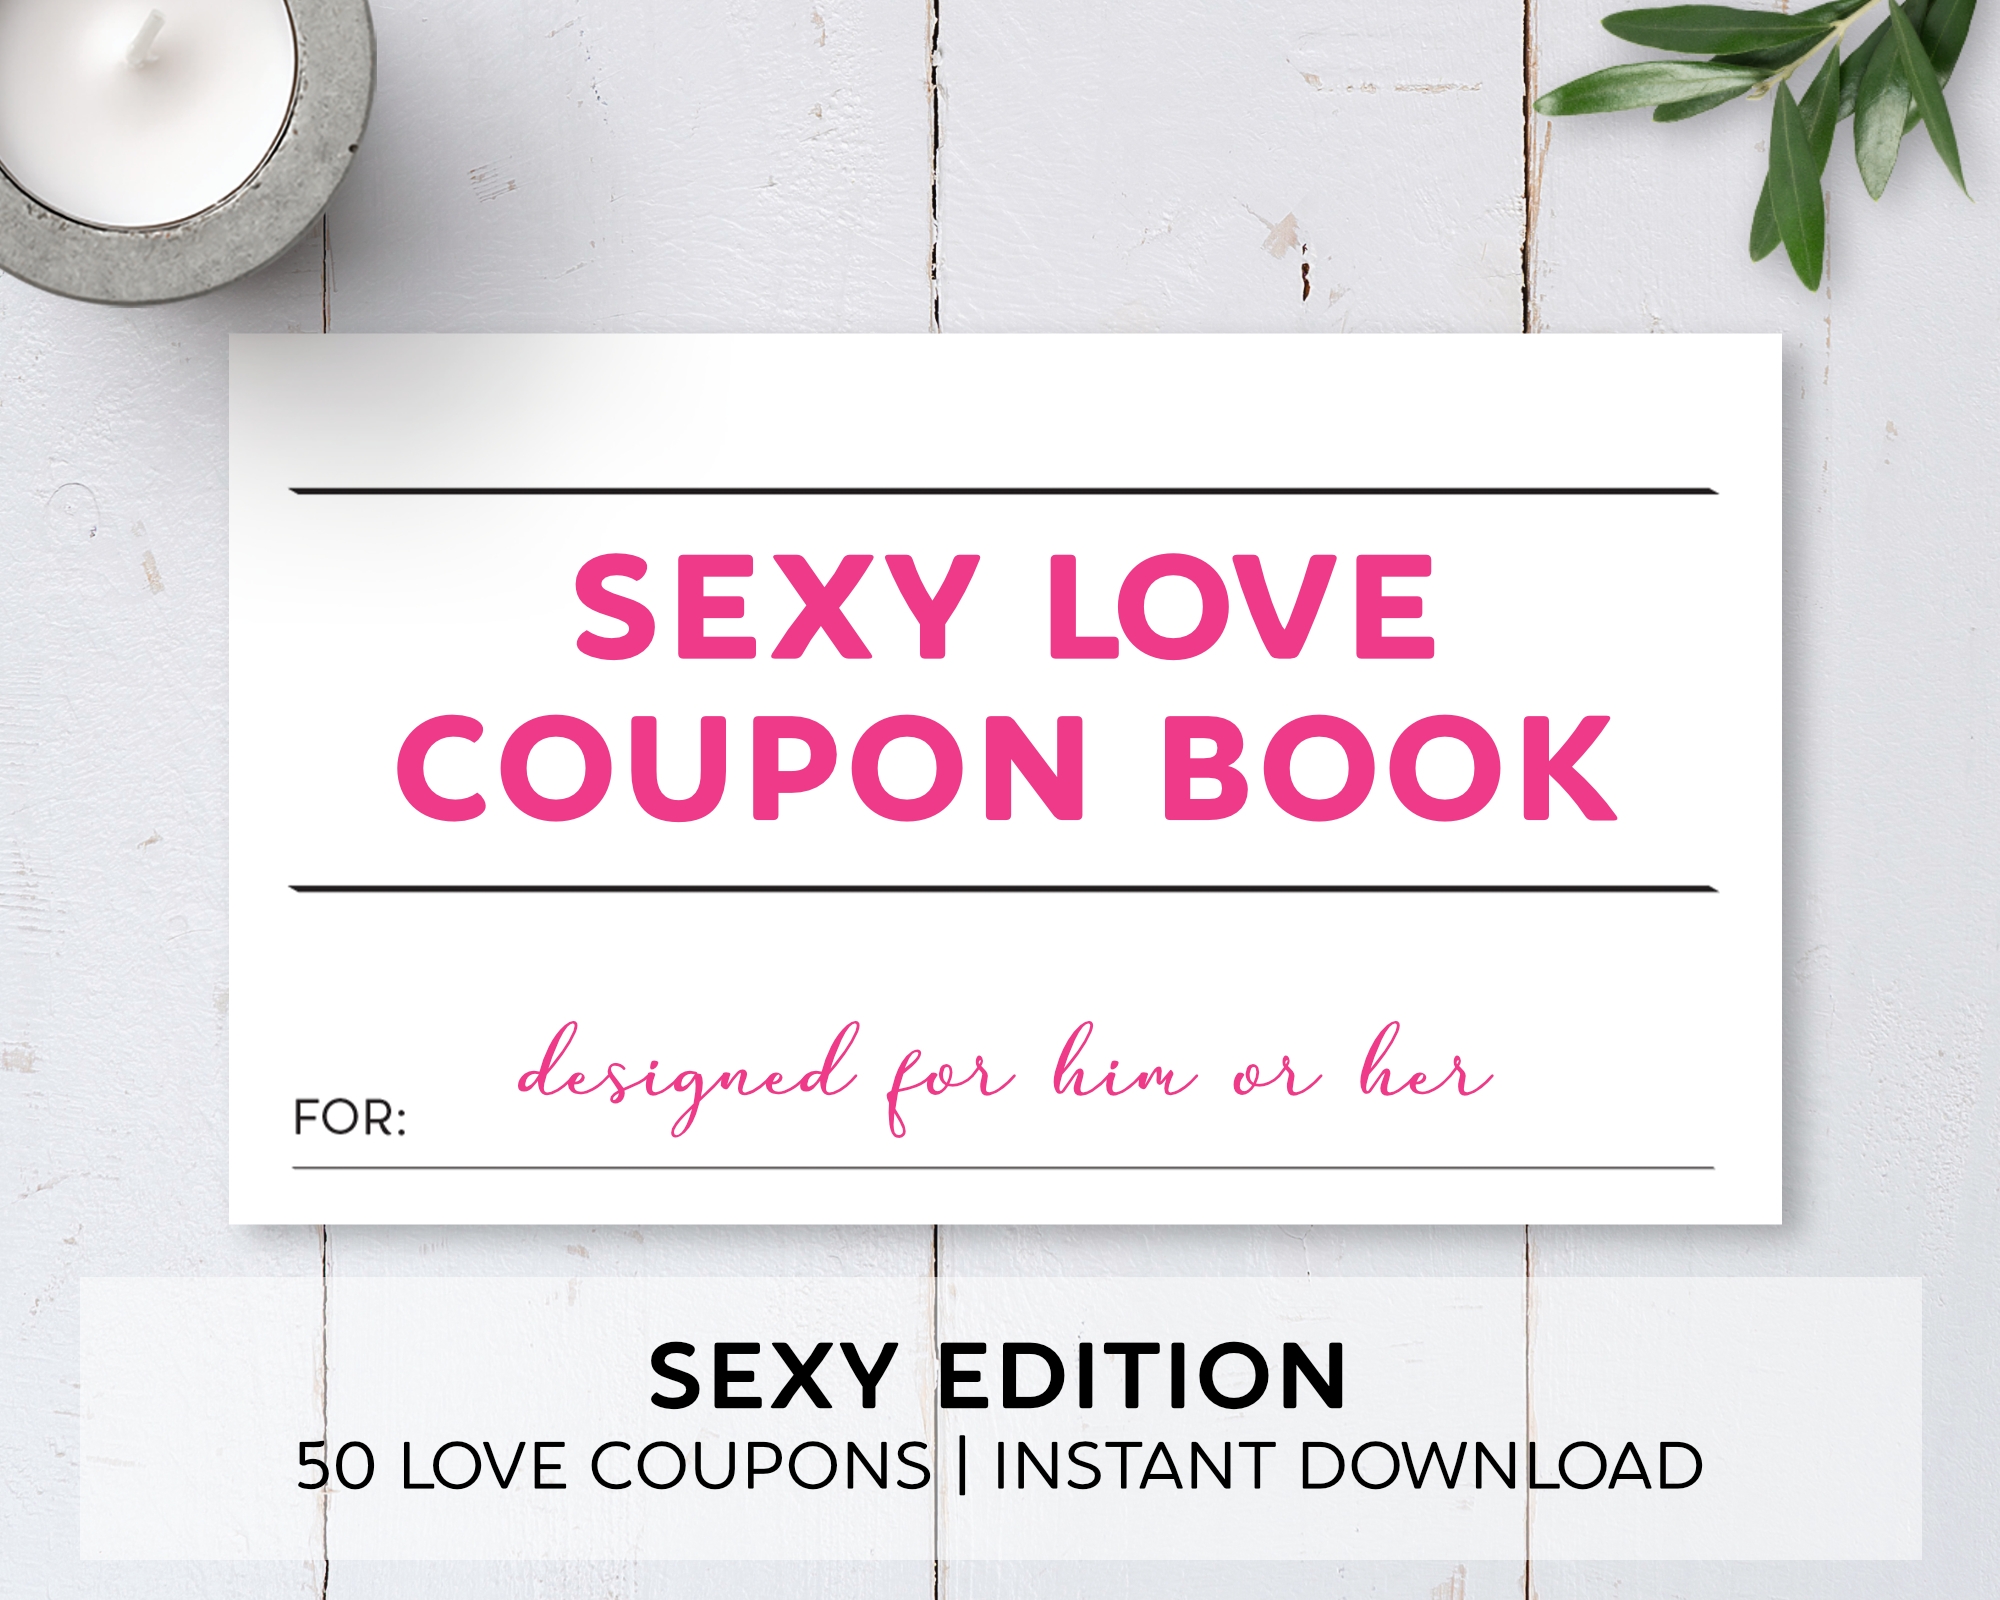 Sexy Edition Love Coupon Book Printable Instant Download Kinky Ink Press